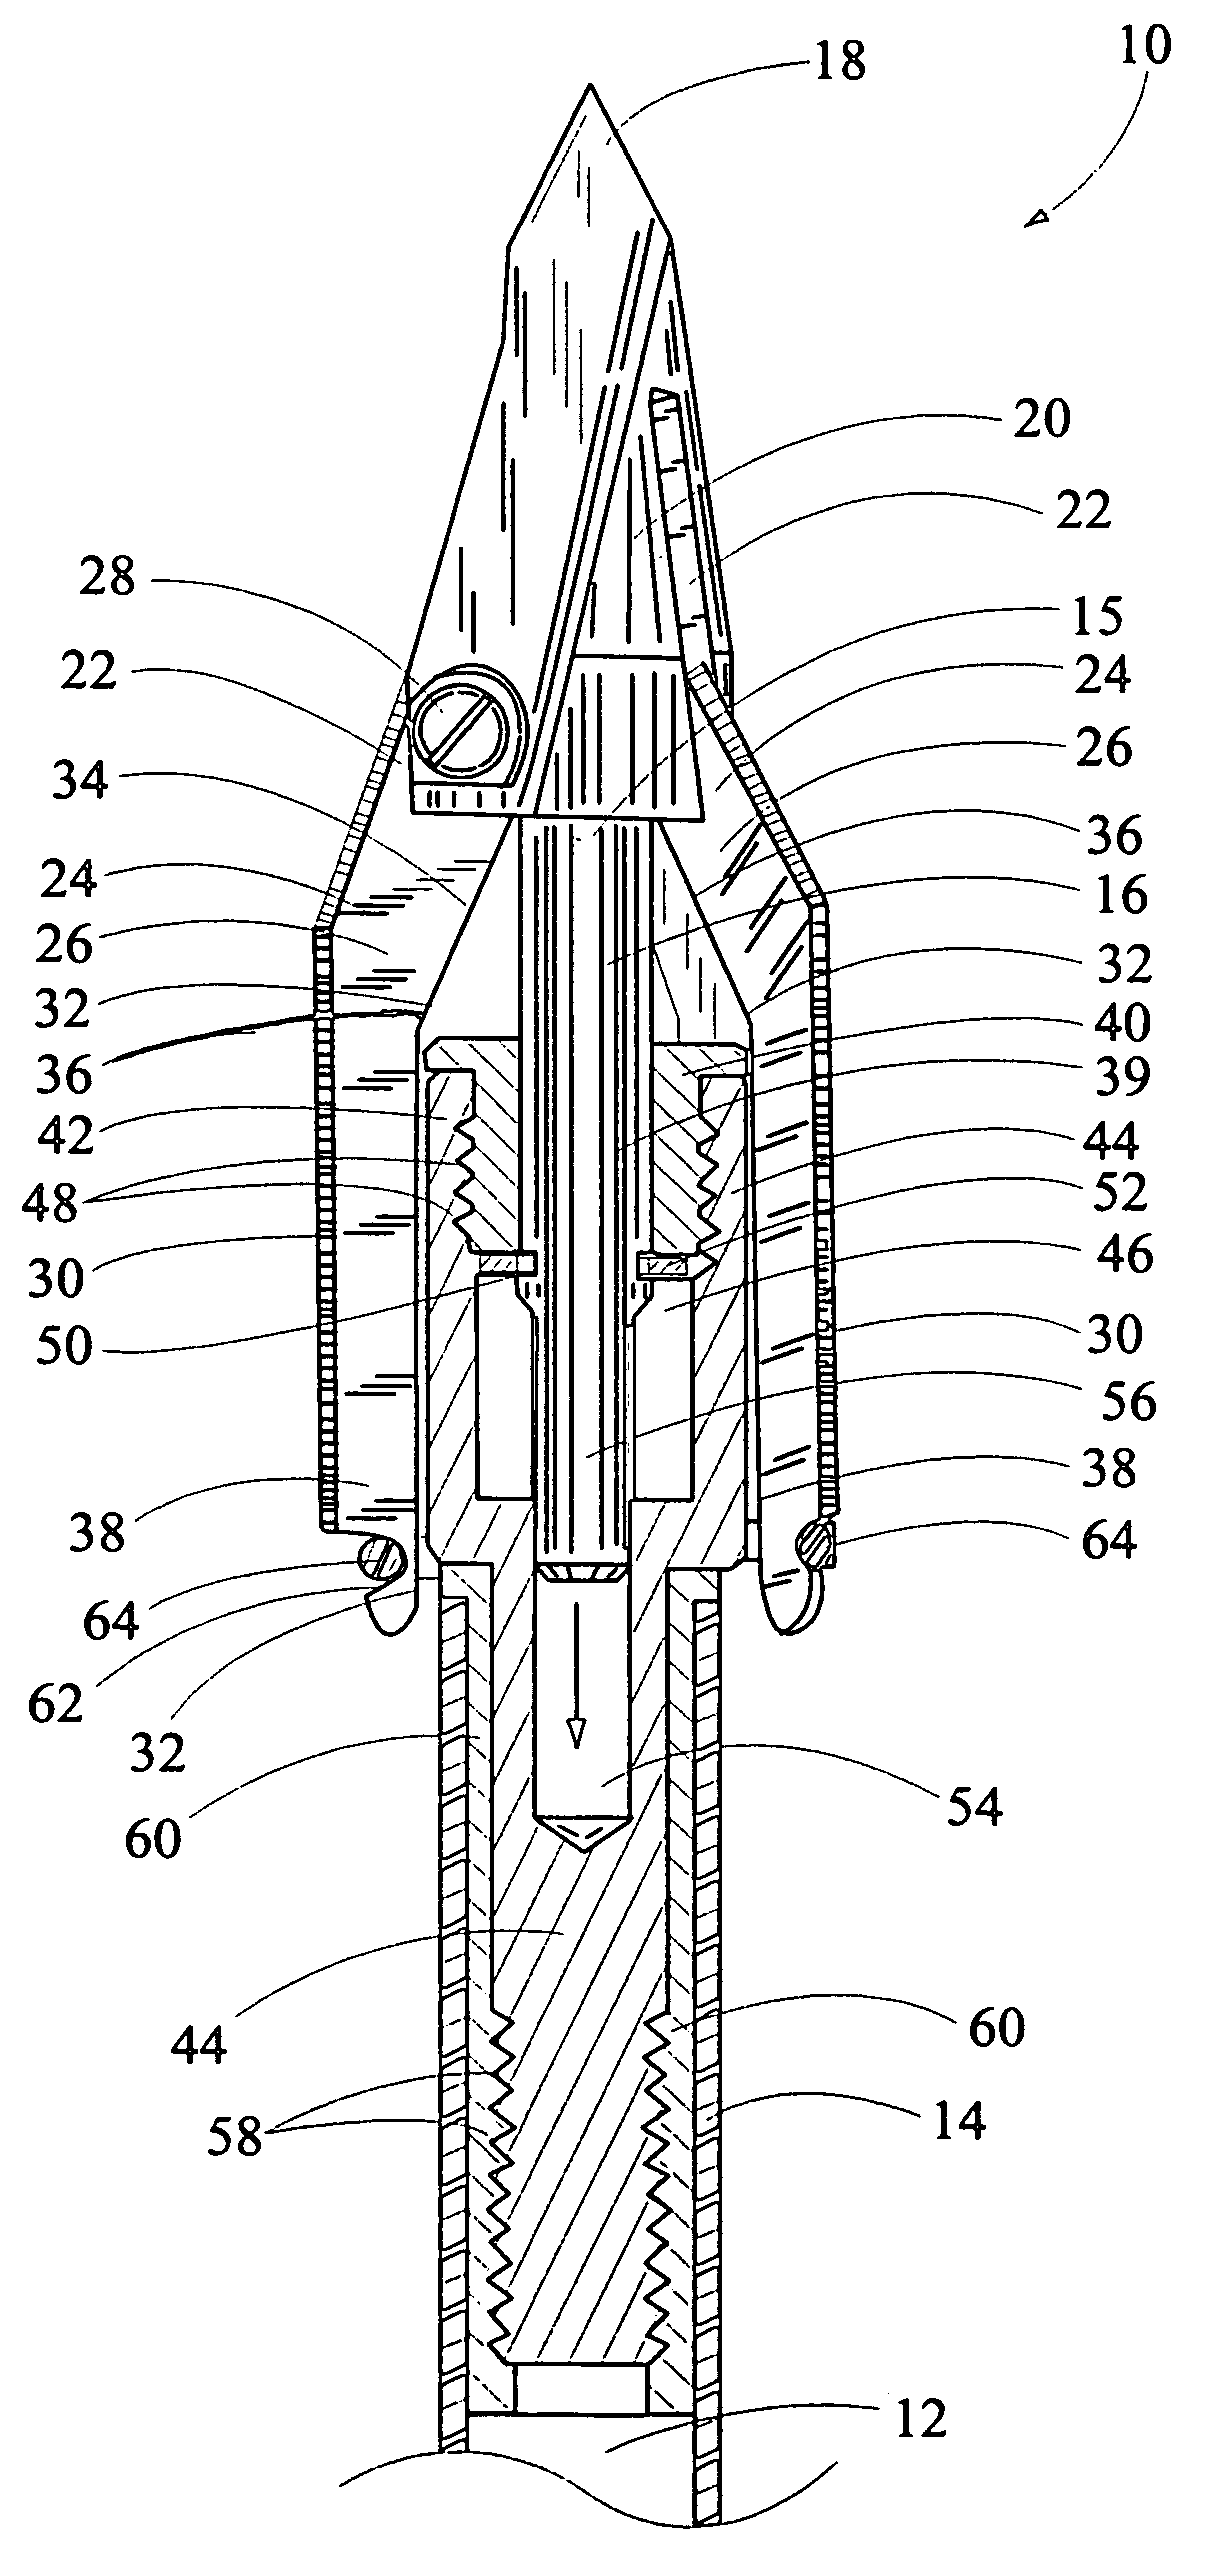 Expandable arrow broadhead for attachment to one end of an arrow shaft